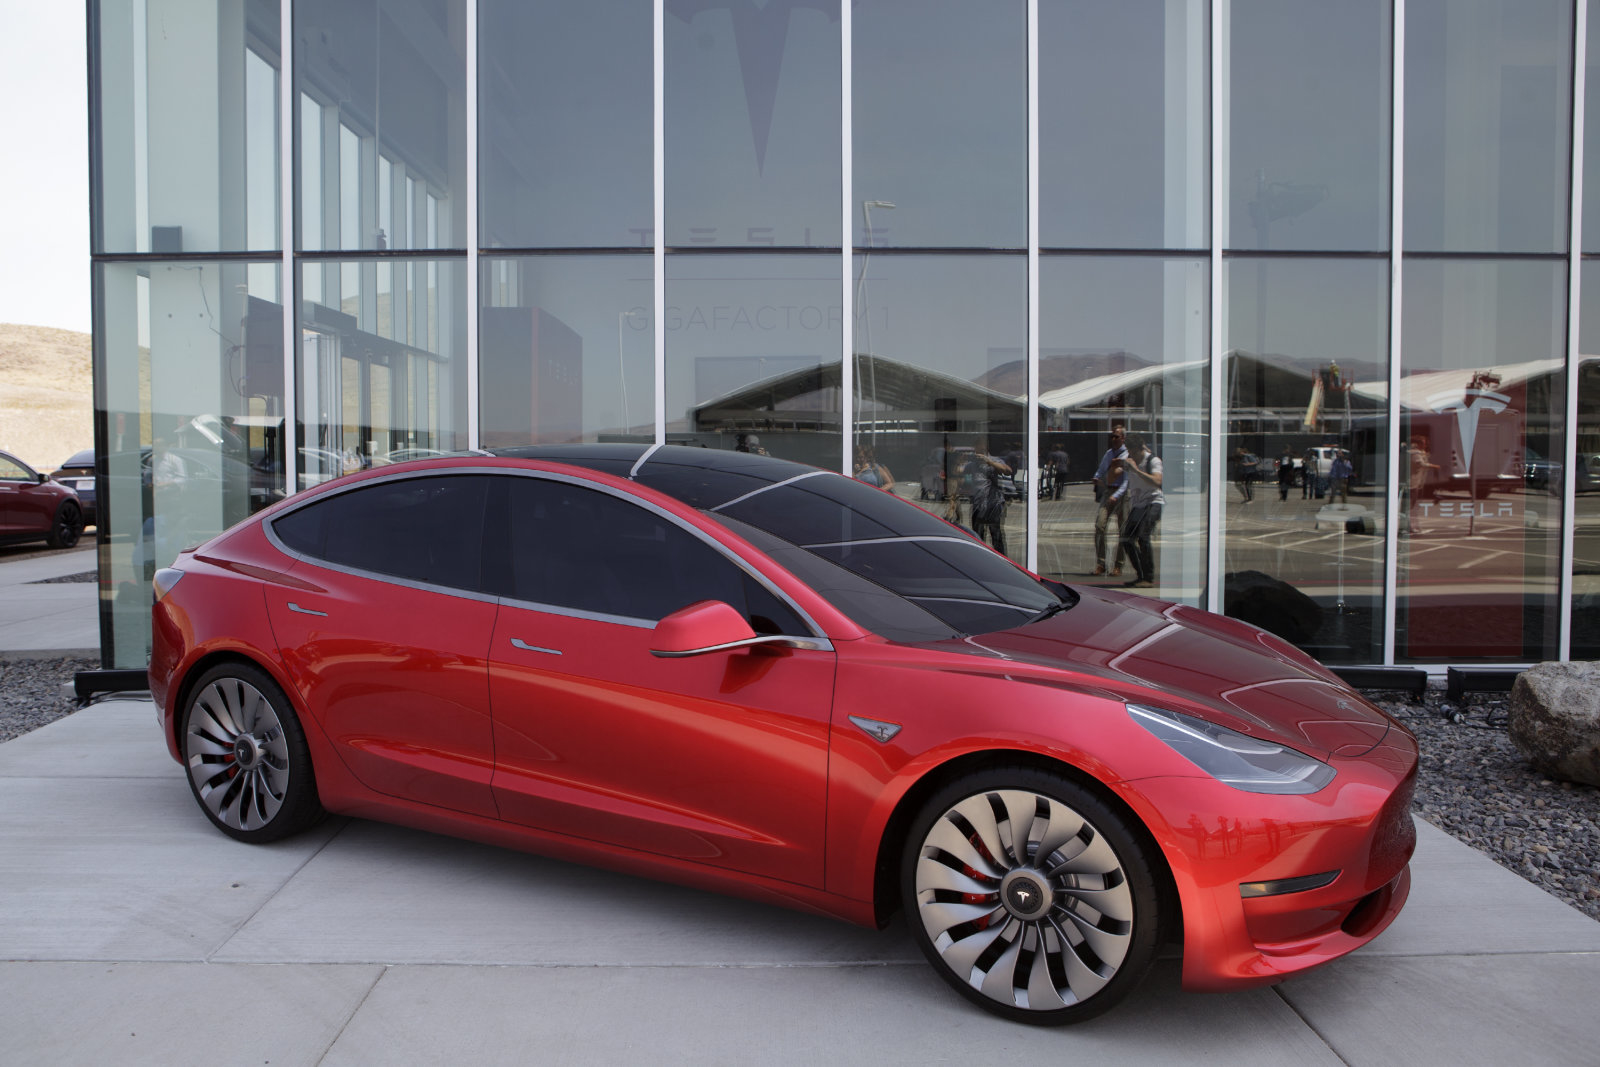 A Tesla Motor Inc. Model 3 vehicle is displayed outside the company's Gigafactory in Sparks, Neveada, U.S., on Tuesday, July 26, 2016. Tesla officially opened its Gigafactory on Tuesday, a little more than two years after construction began. The factory is about 14 percent complete but when it's finished, it will be about 10 million square feet, or about the size of 262 NFL football fields. Photographer: Troy Harvey/Bloomberg via Getty Images